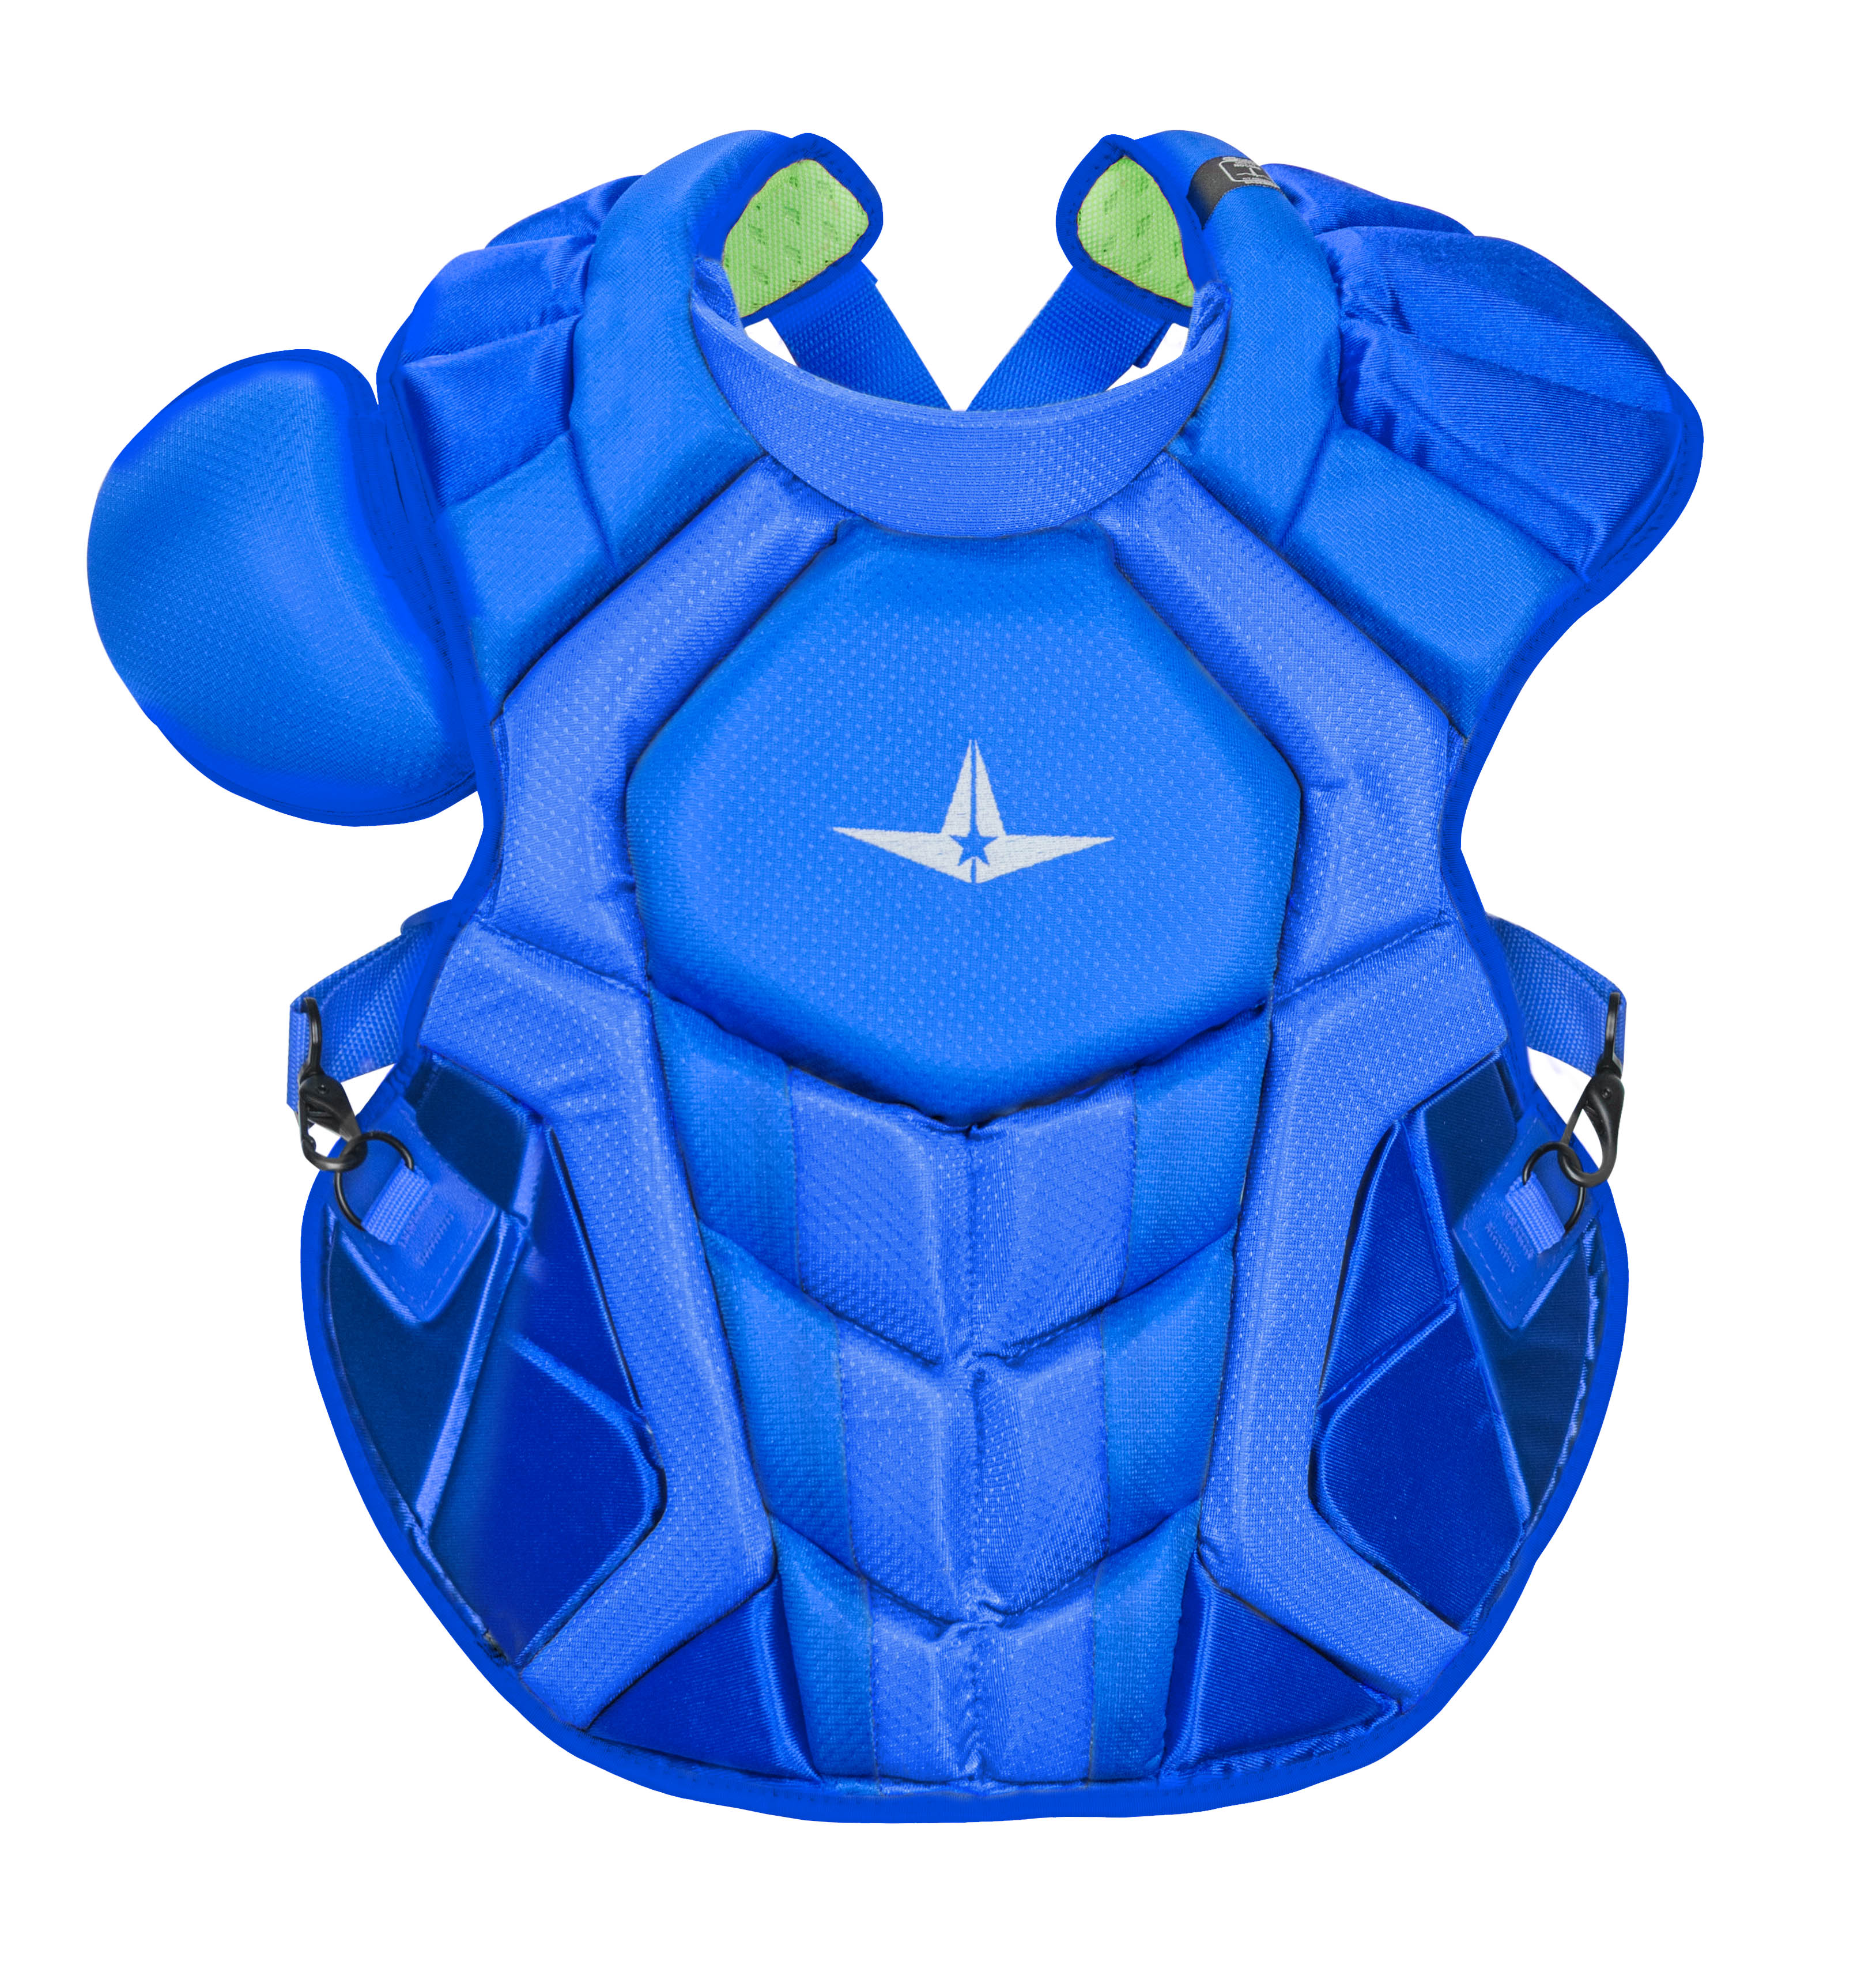 All-Star S7 Chest Protector / Meets NOCSAE / Solid Colors / Adult